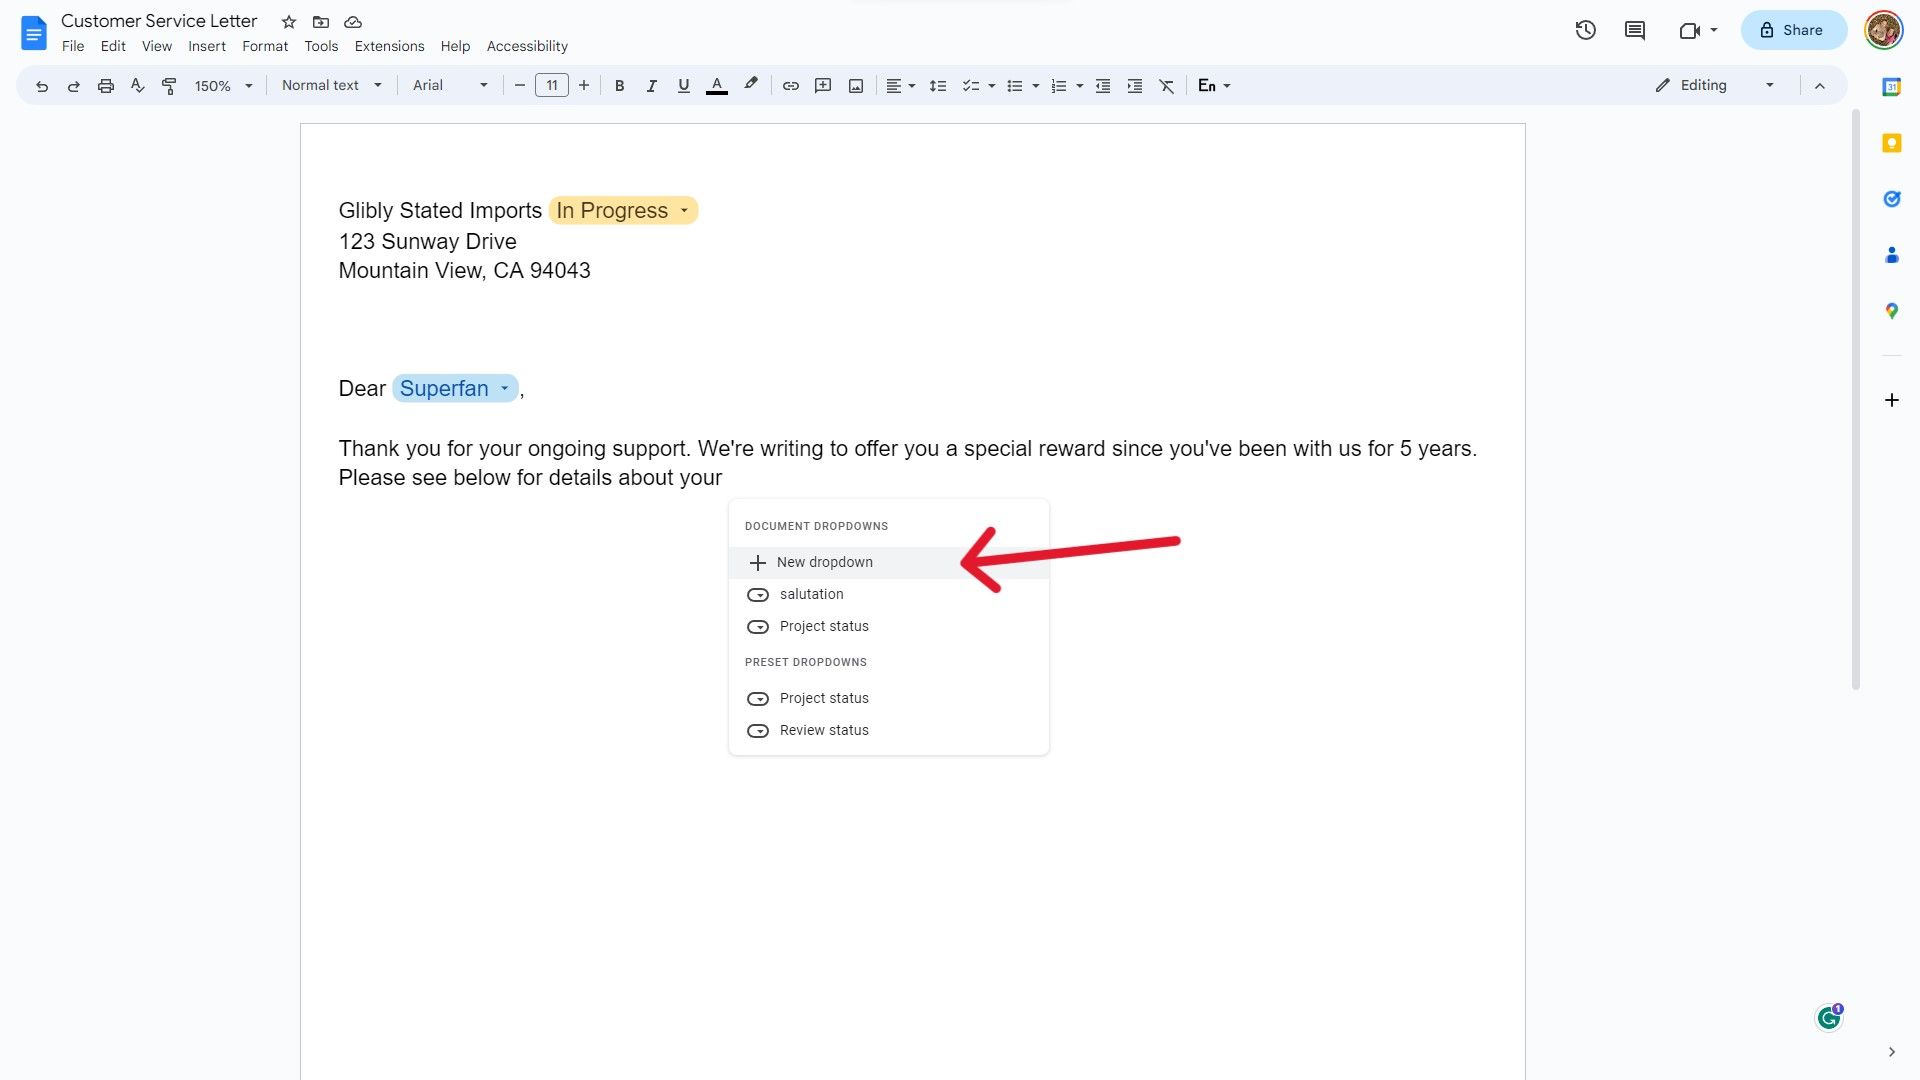 A screenshot of a Google Docs document showing how to create a new dropdown.